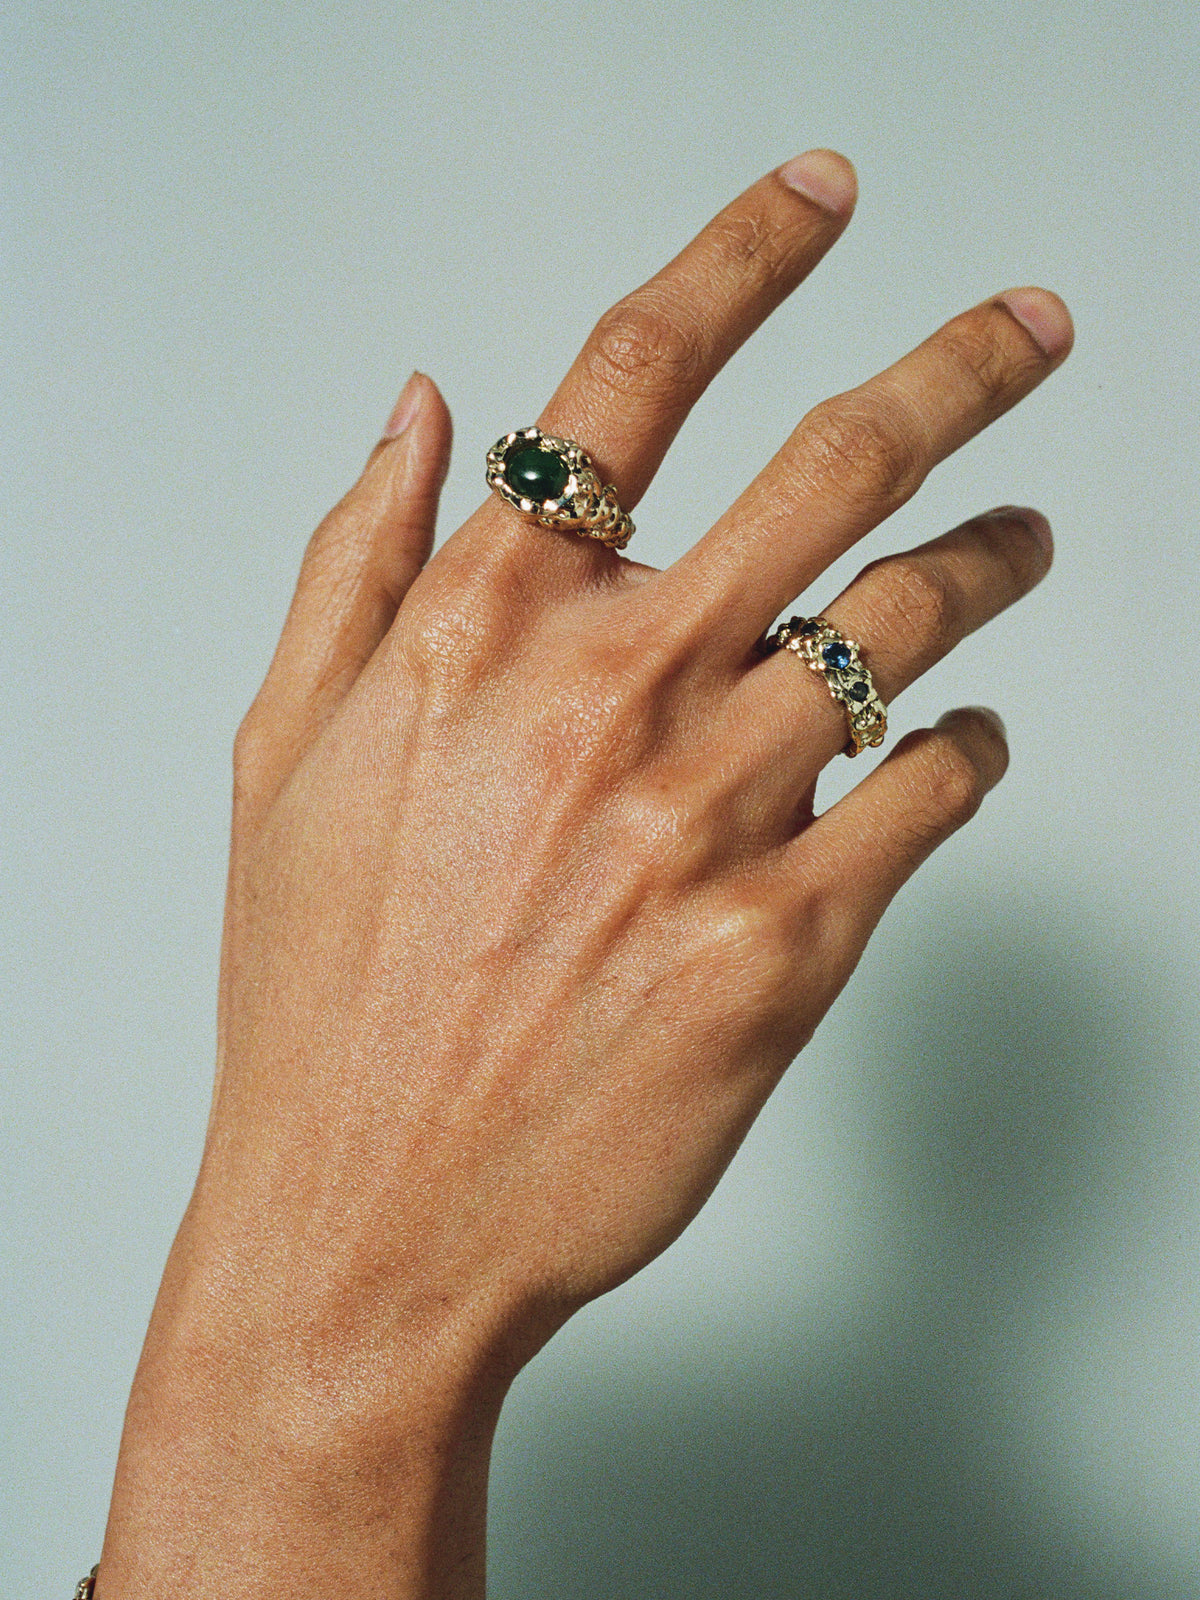 FARIS ROCA EYE Ring in gold-plated bronze with jade worn on model. Styled with ROCA GEM Band in gold-plated bronze with lab-created blue and green sapphires